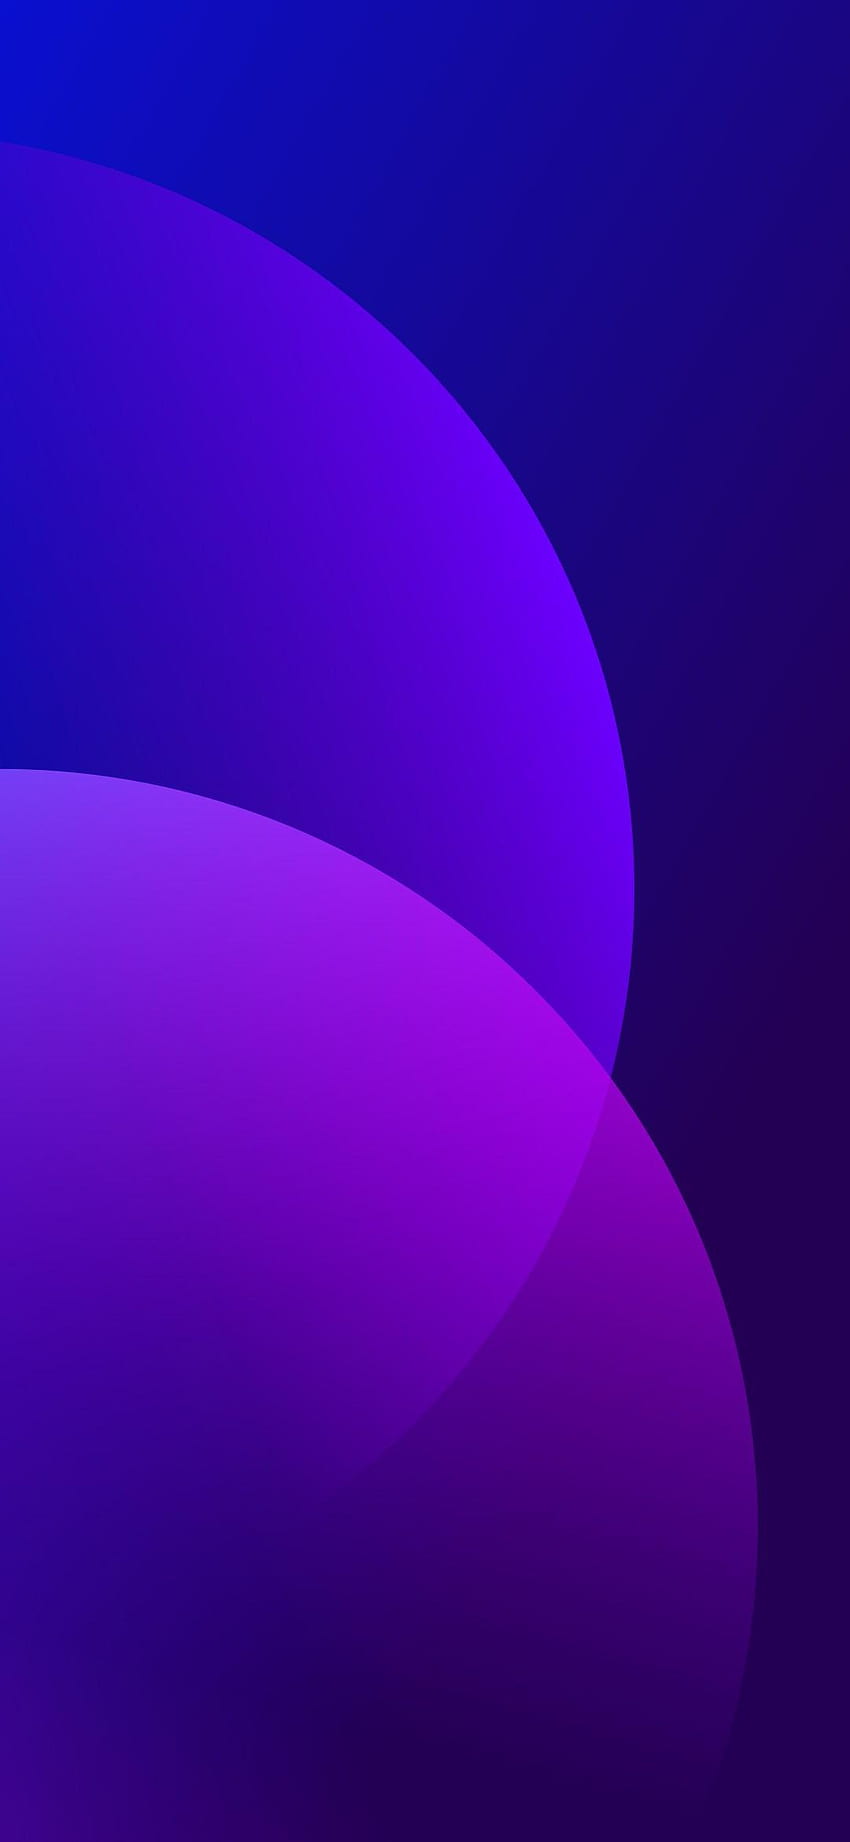 Best them store and wallpaper for our realme devices - realme Community